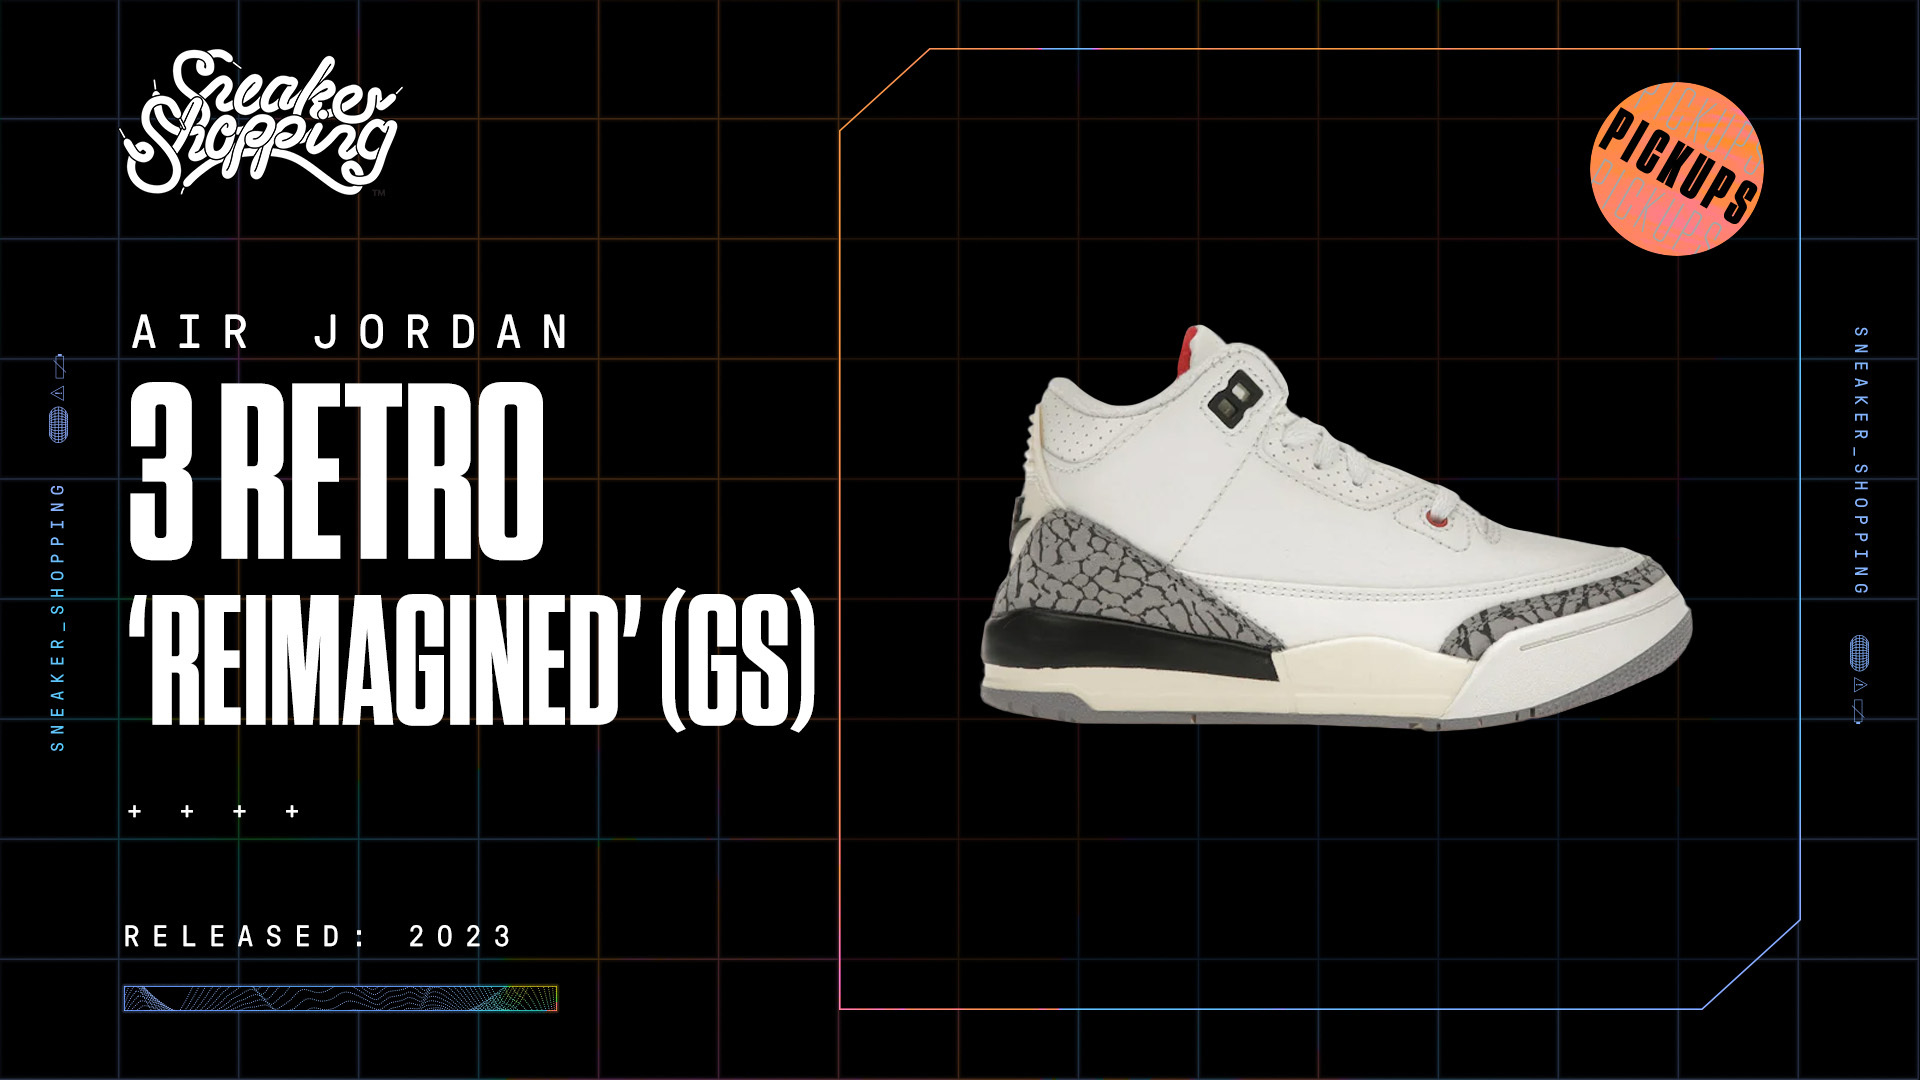 Air Jordan 3 Retro &#x27;Reimagined&#x27; (GS) sneaker ad. White and black sneaker with elephant print details, released 2023